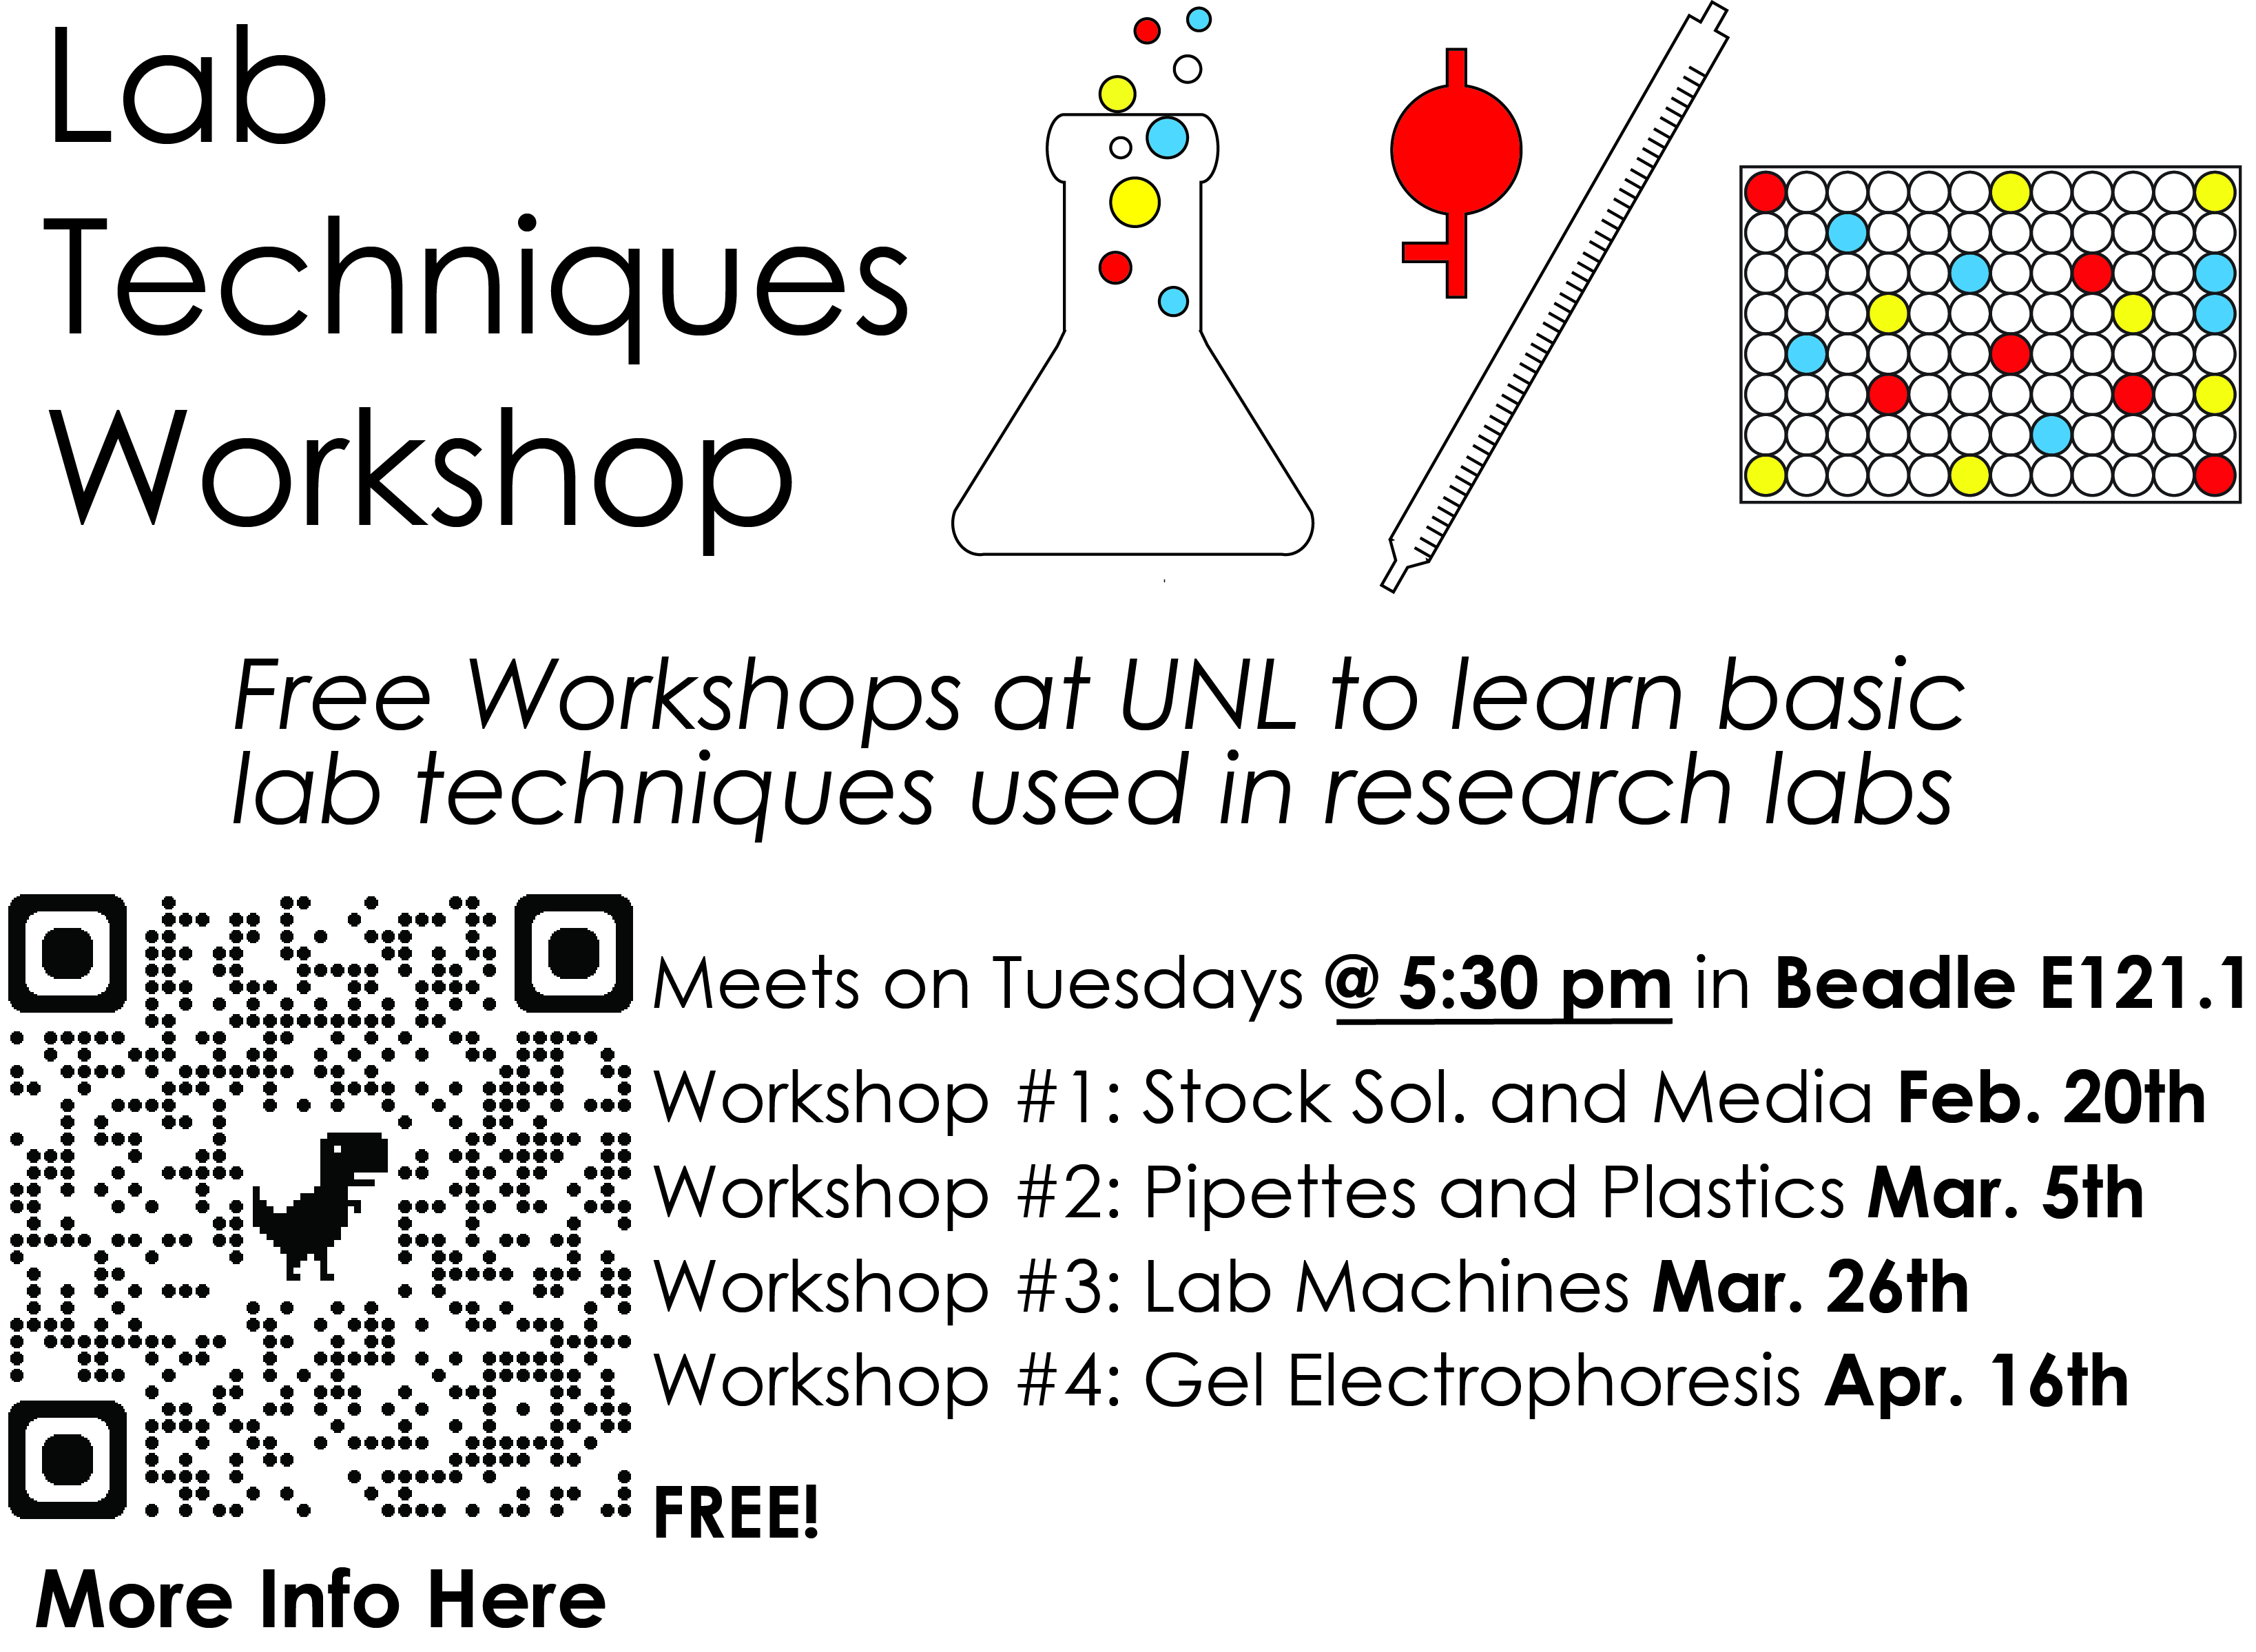 Flyer for Lab Techniques Workshop with dates and time